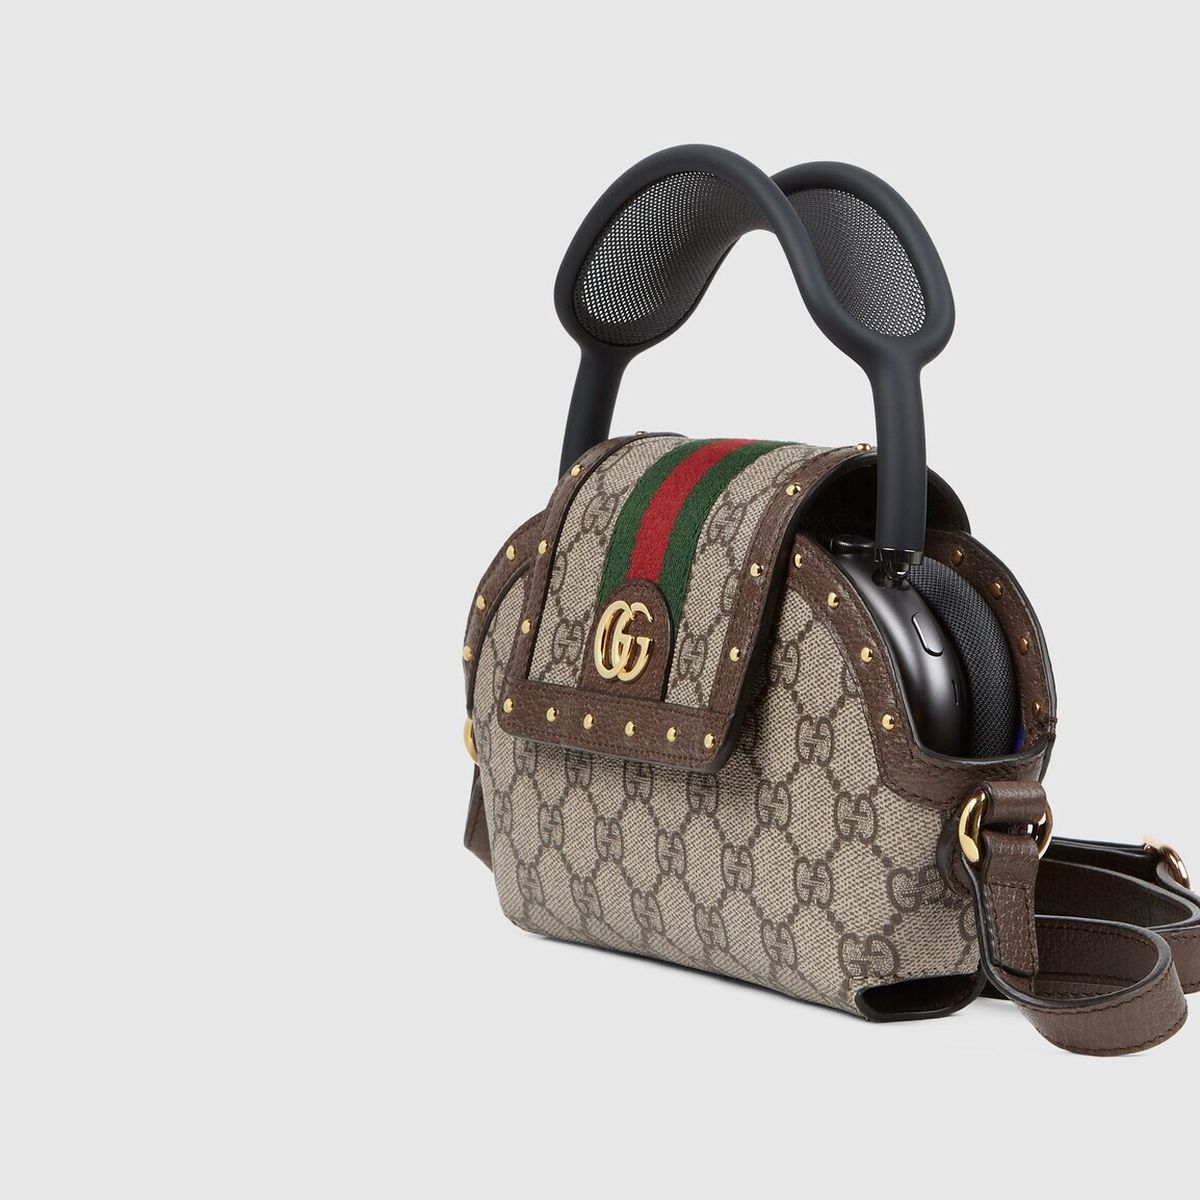 Stand out from the crowd with our Gucci Inspired AirPods cases